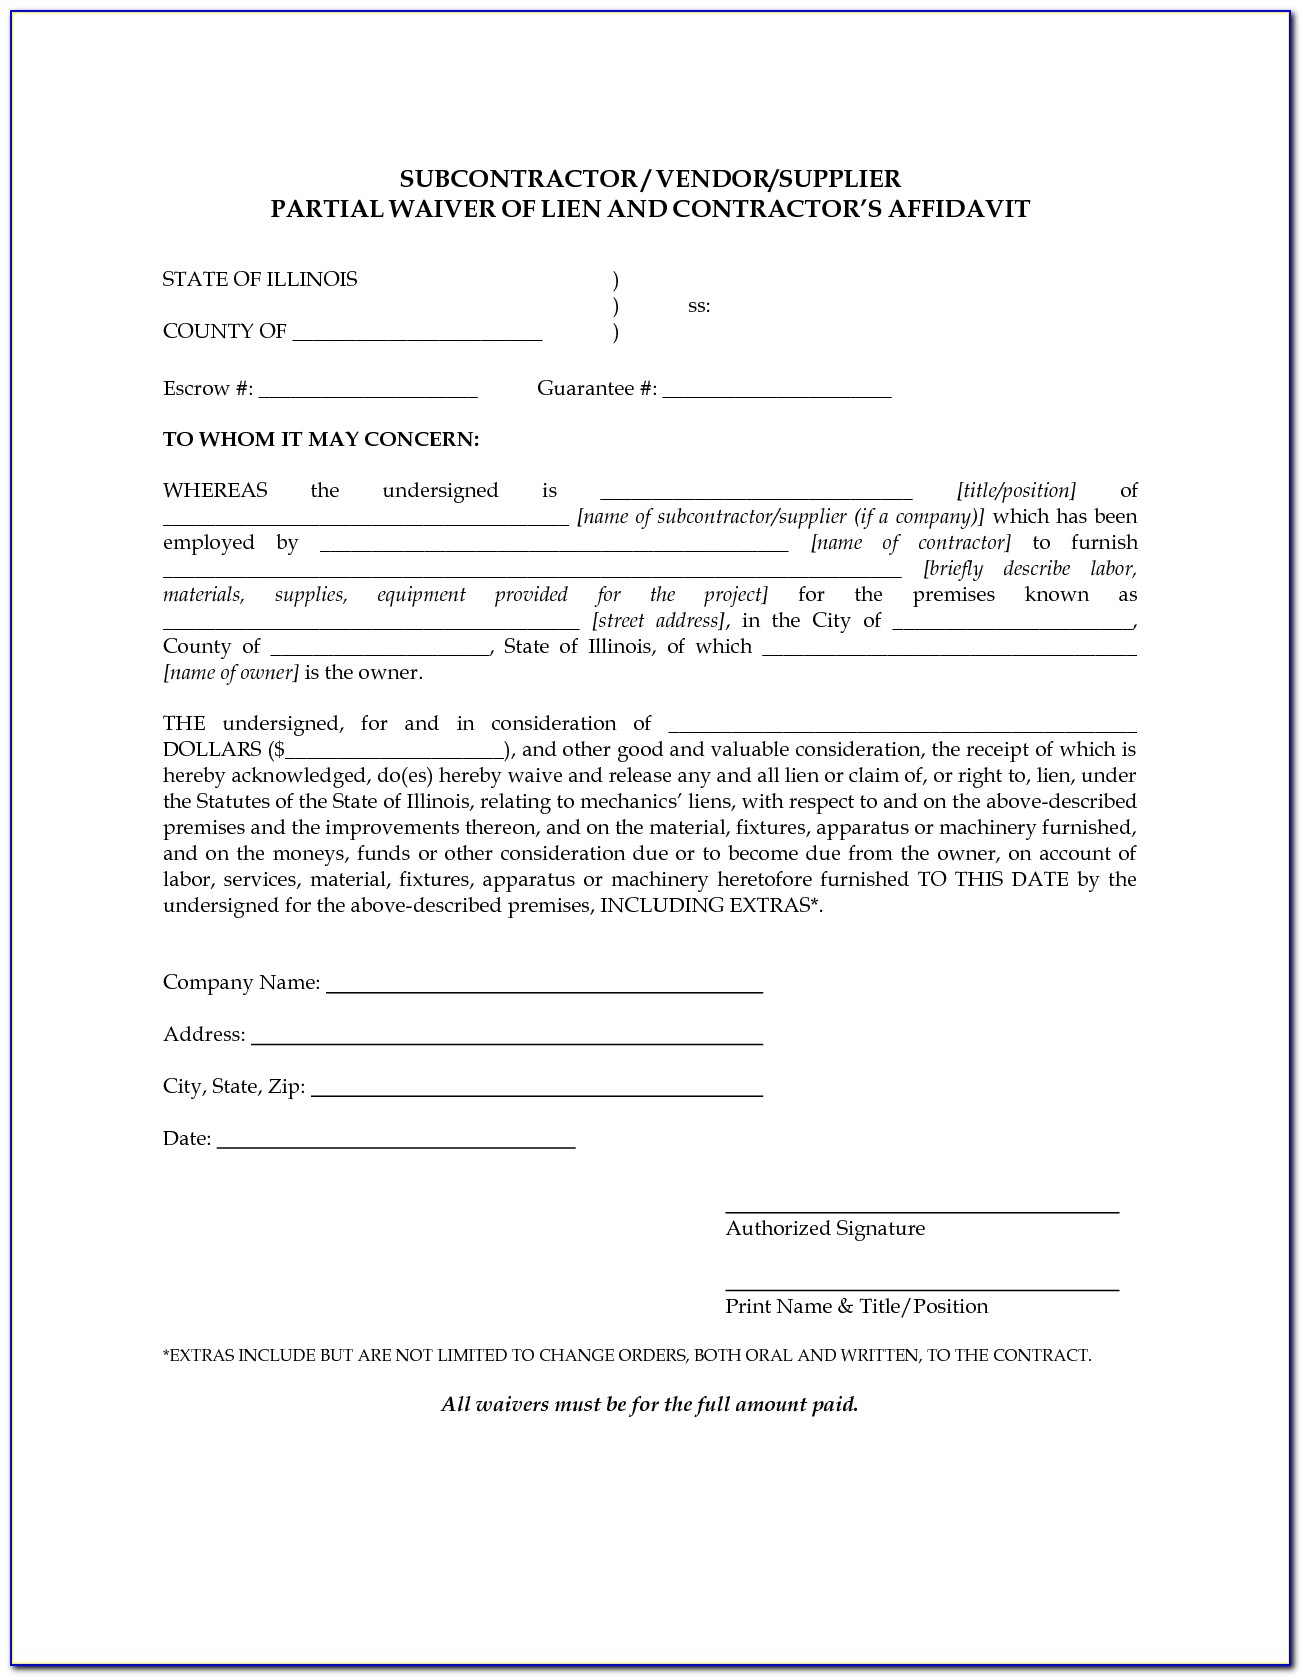 Miami Dade County Partial Release Of Lien Form